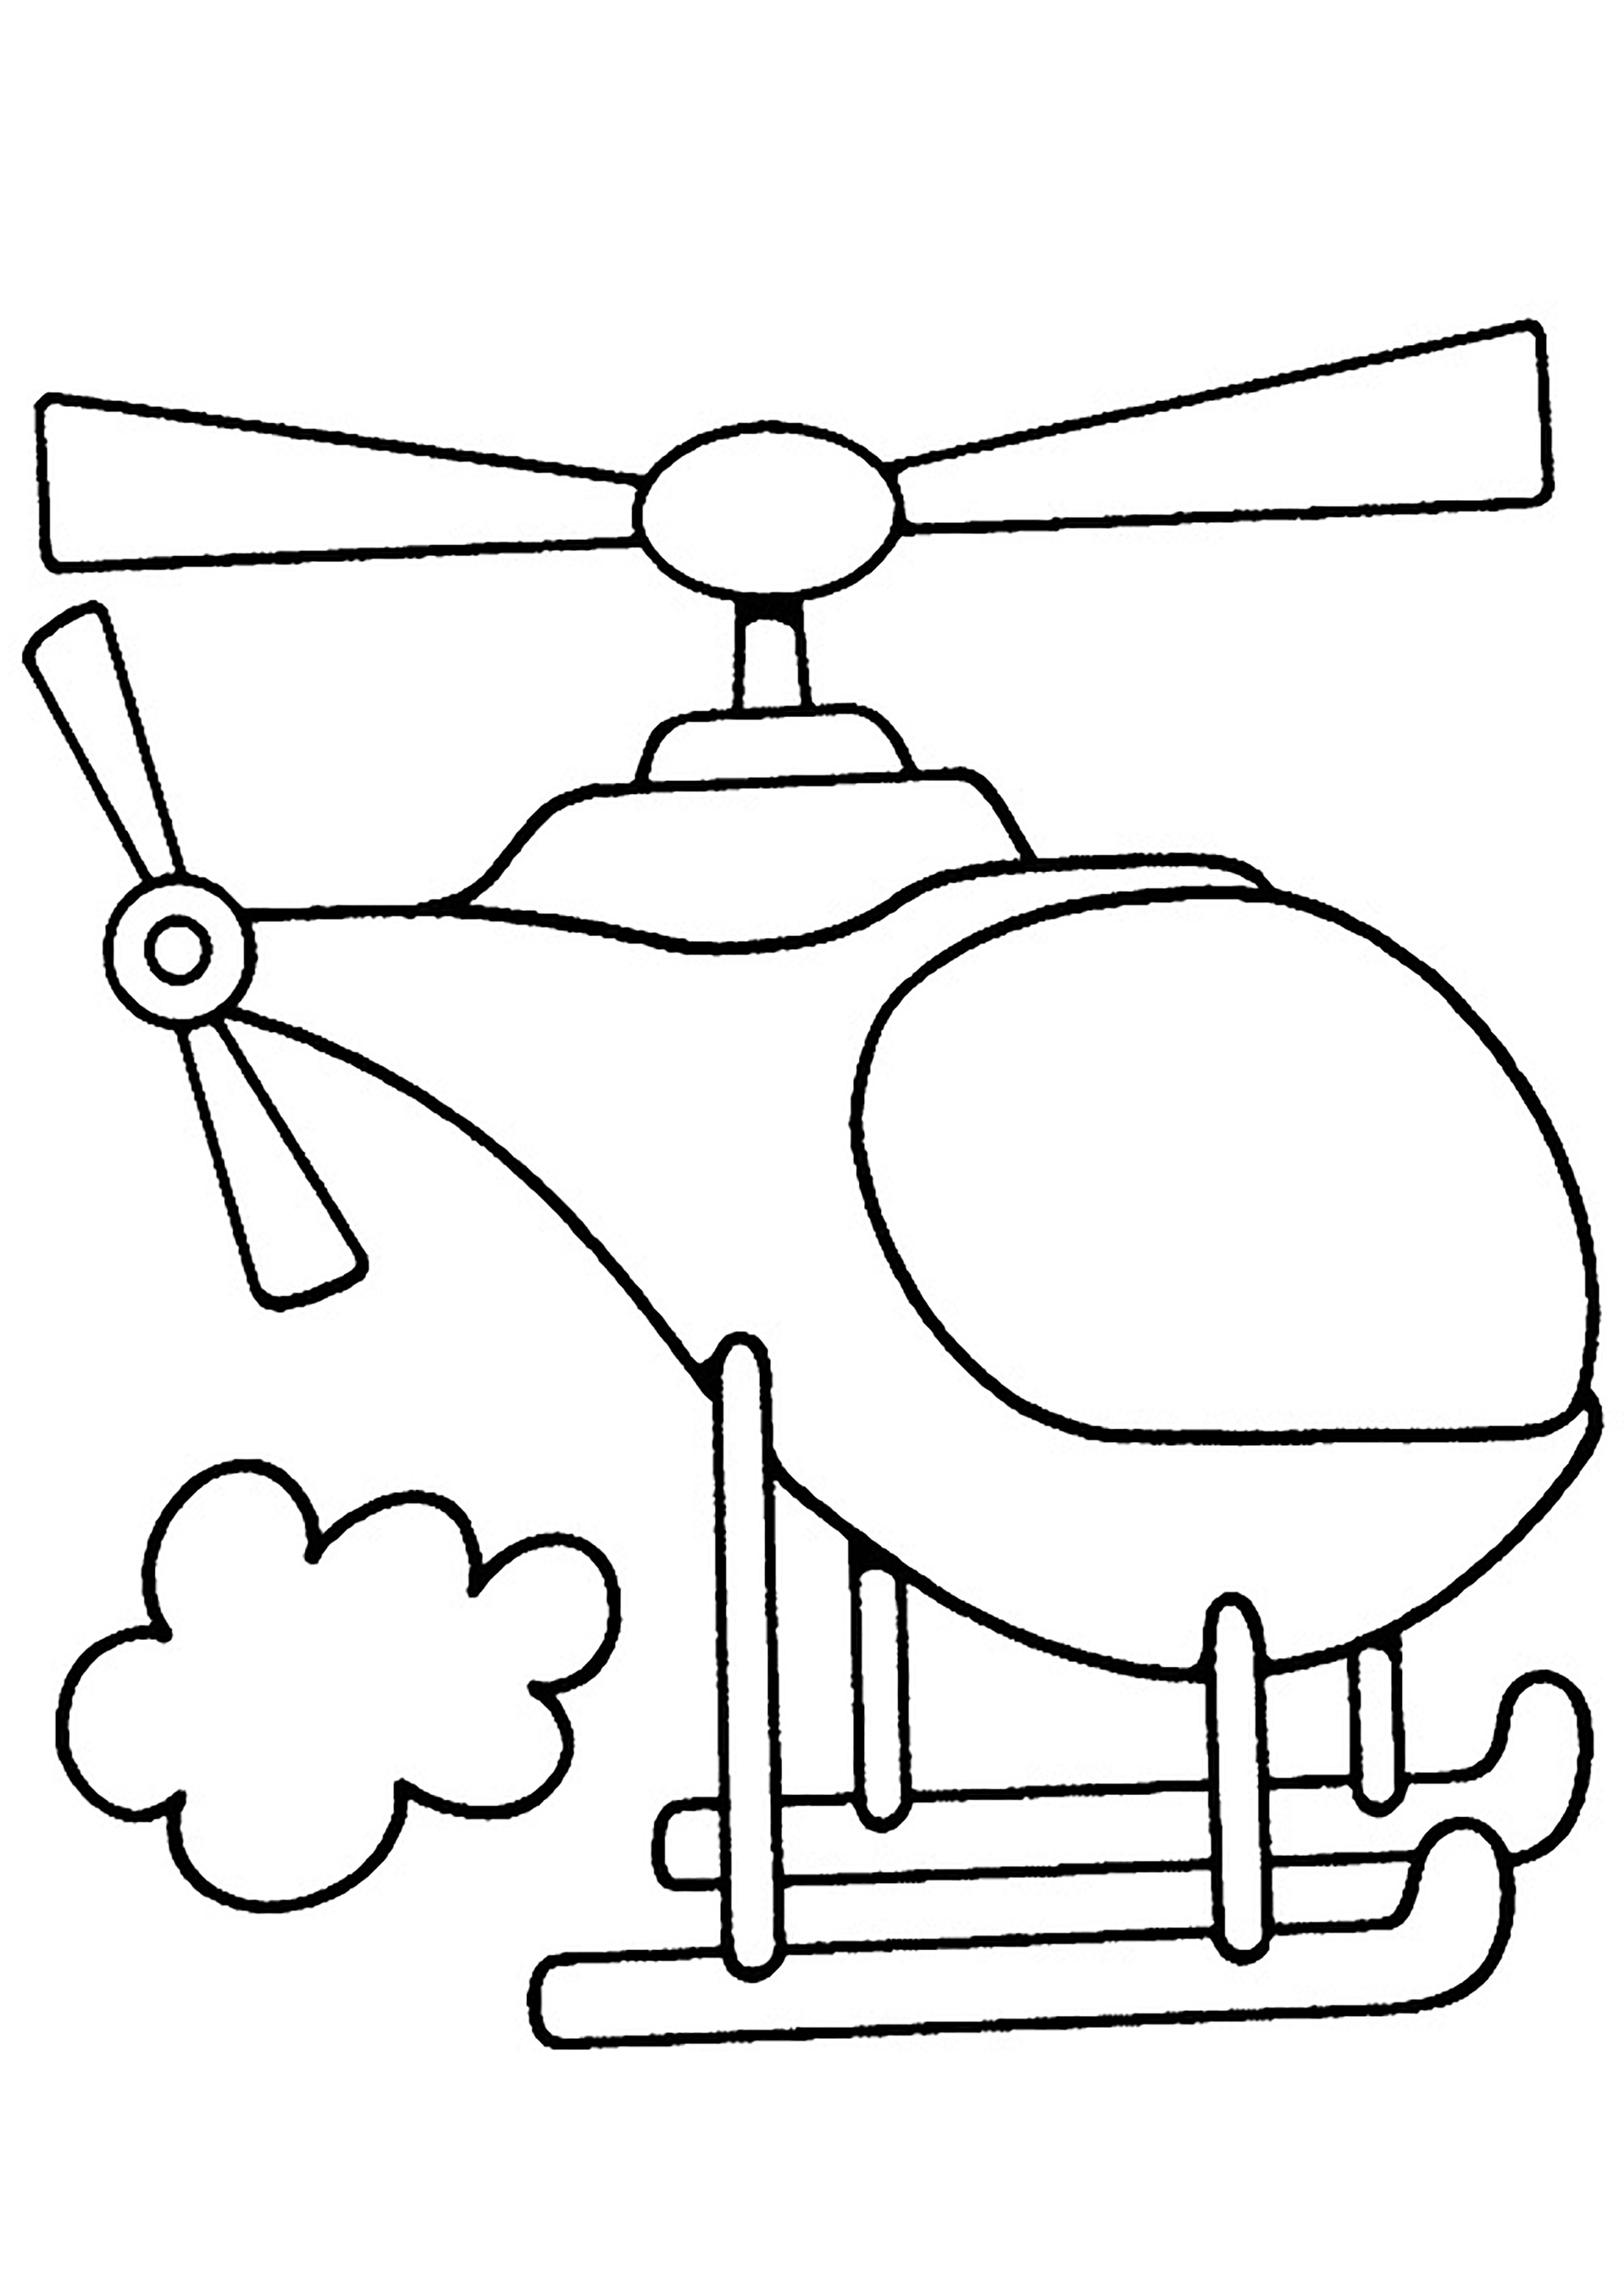 How to Draw a Helicopter Easy Drawing for beginners - YouTube